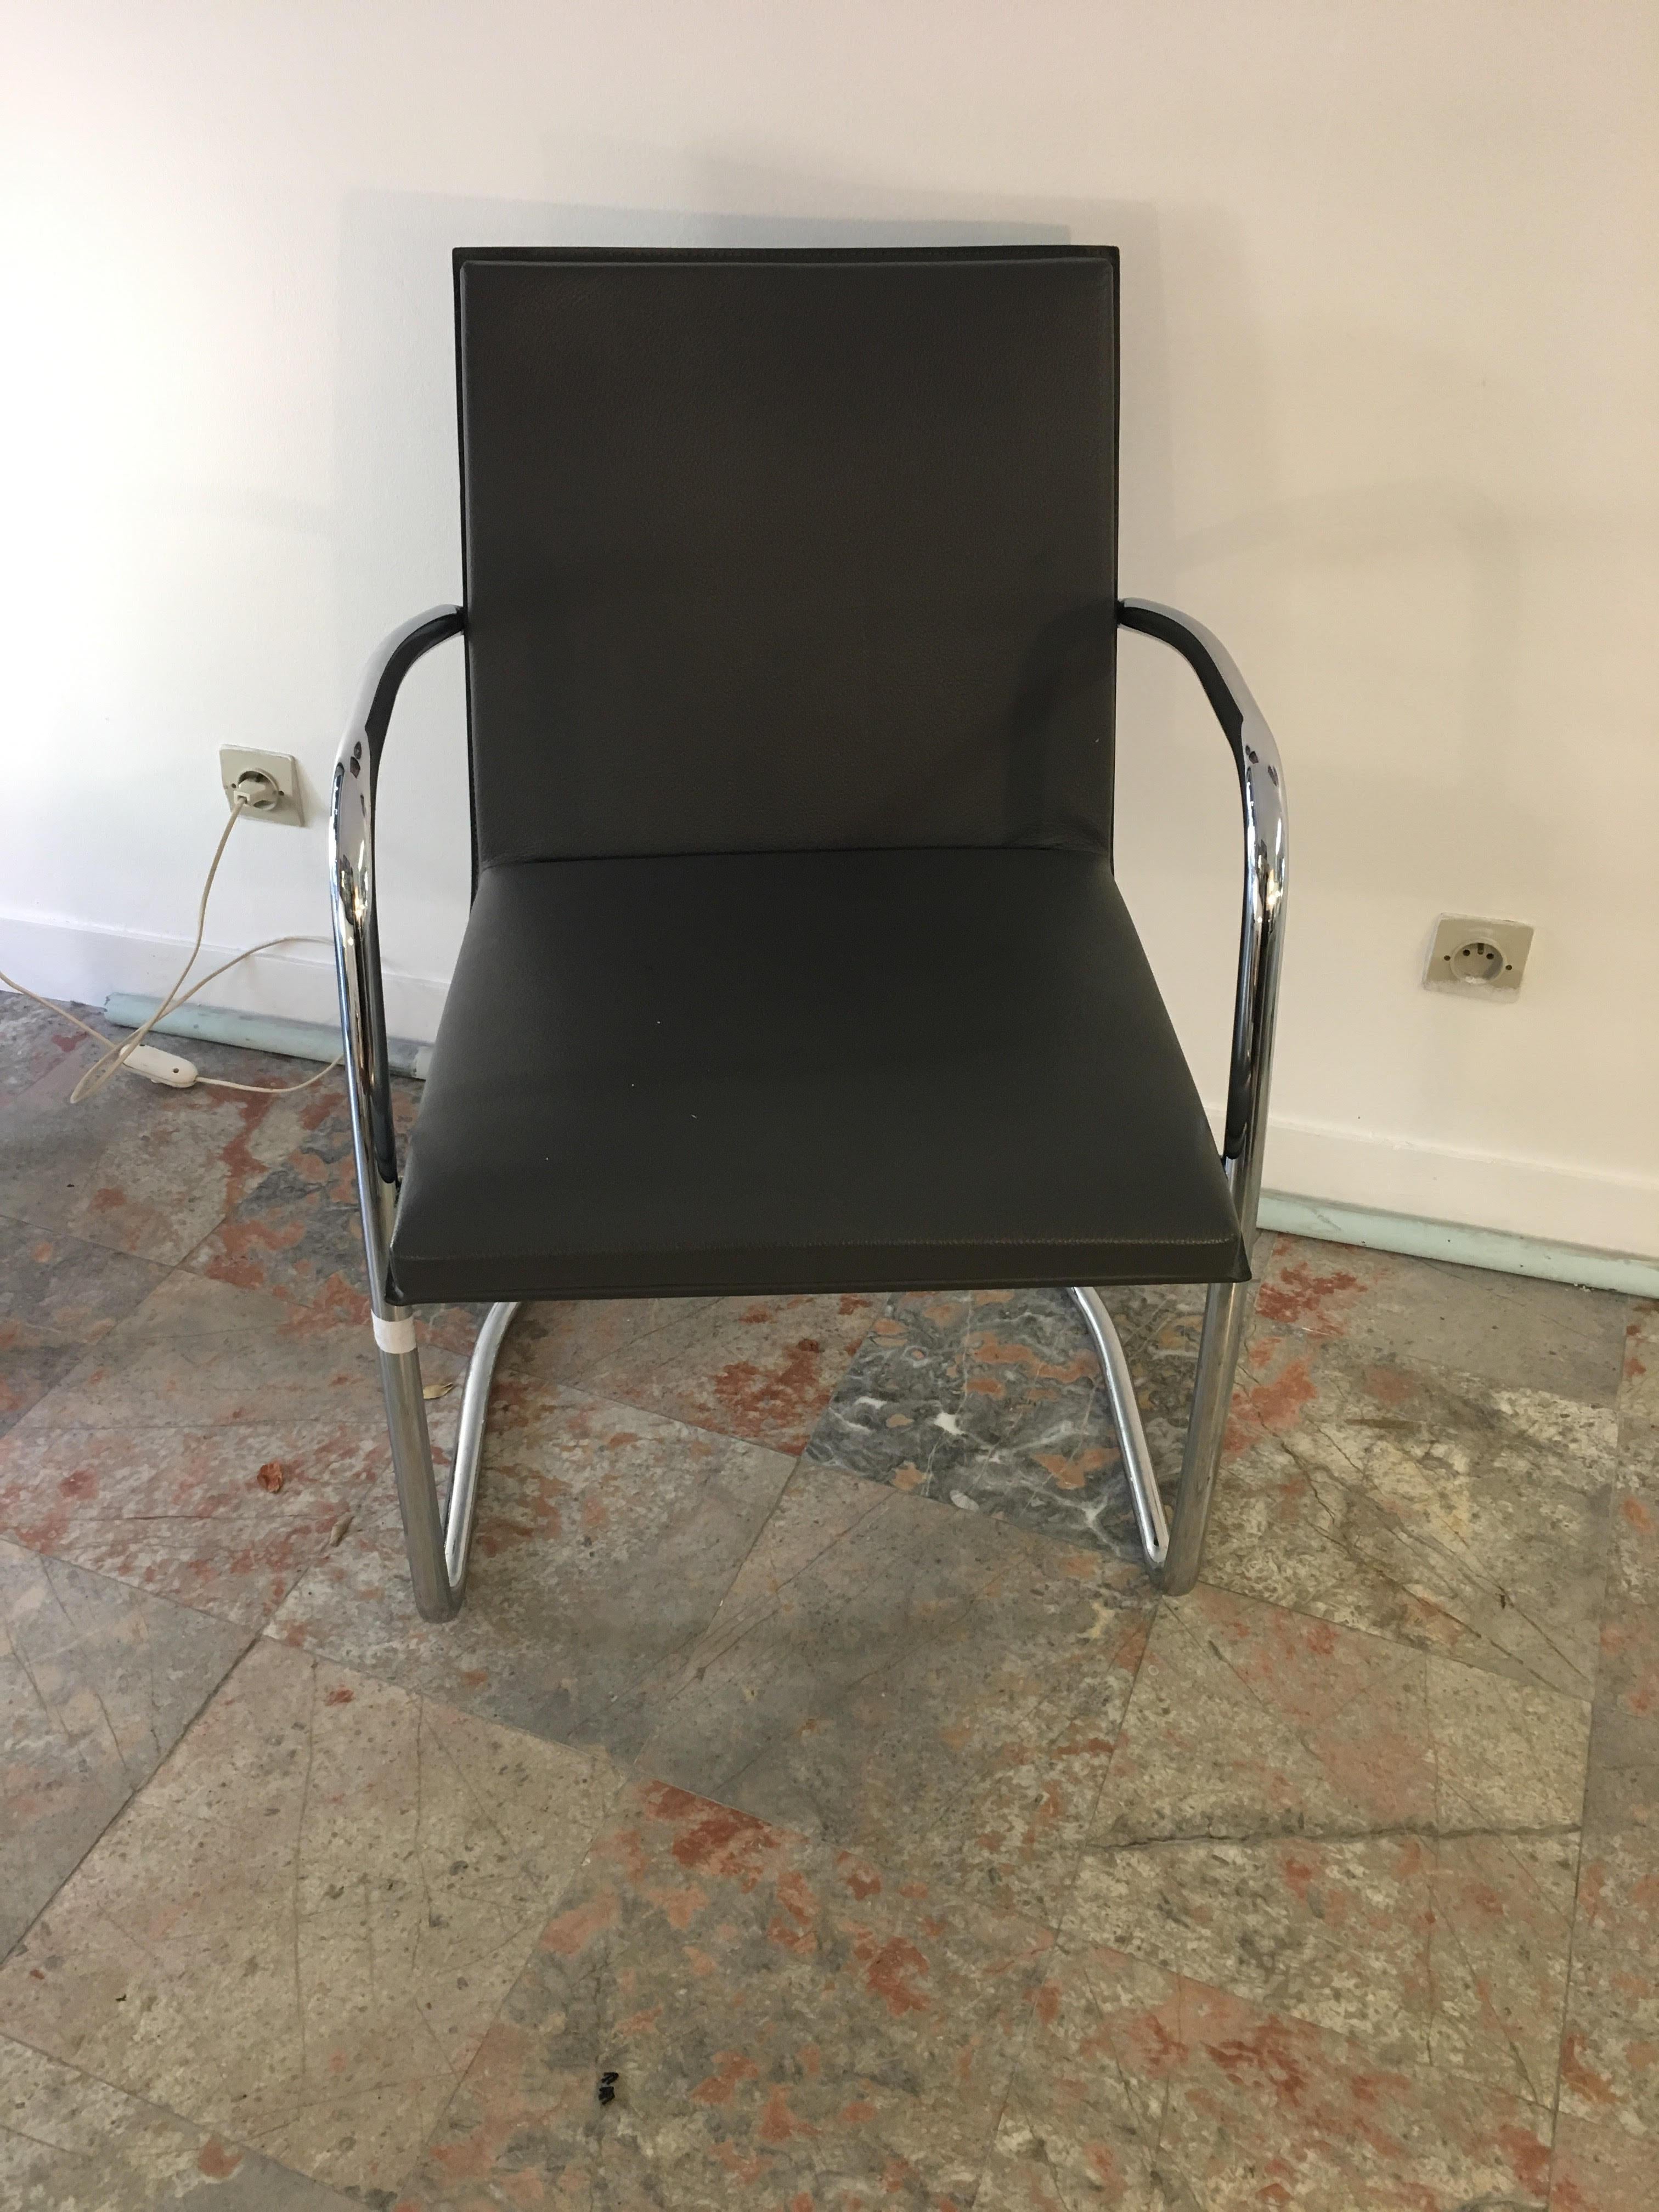 Matteo Grassi armchair Mizar model,
circa 2000.
Gray leather and steel
Cantilever base
Signature on the back
Excellent condition
390 € (Value 1900 €) - 4 available.